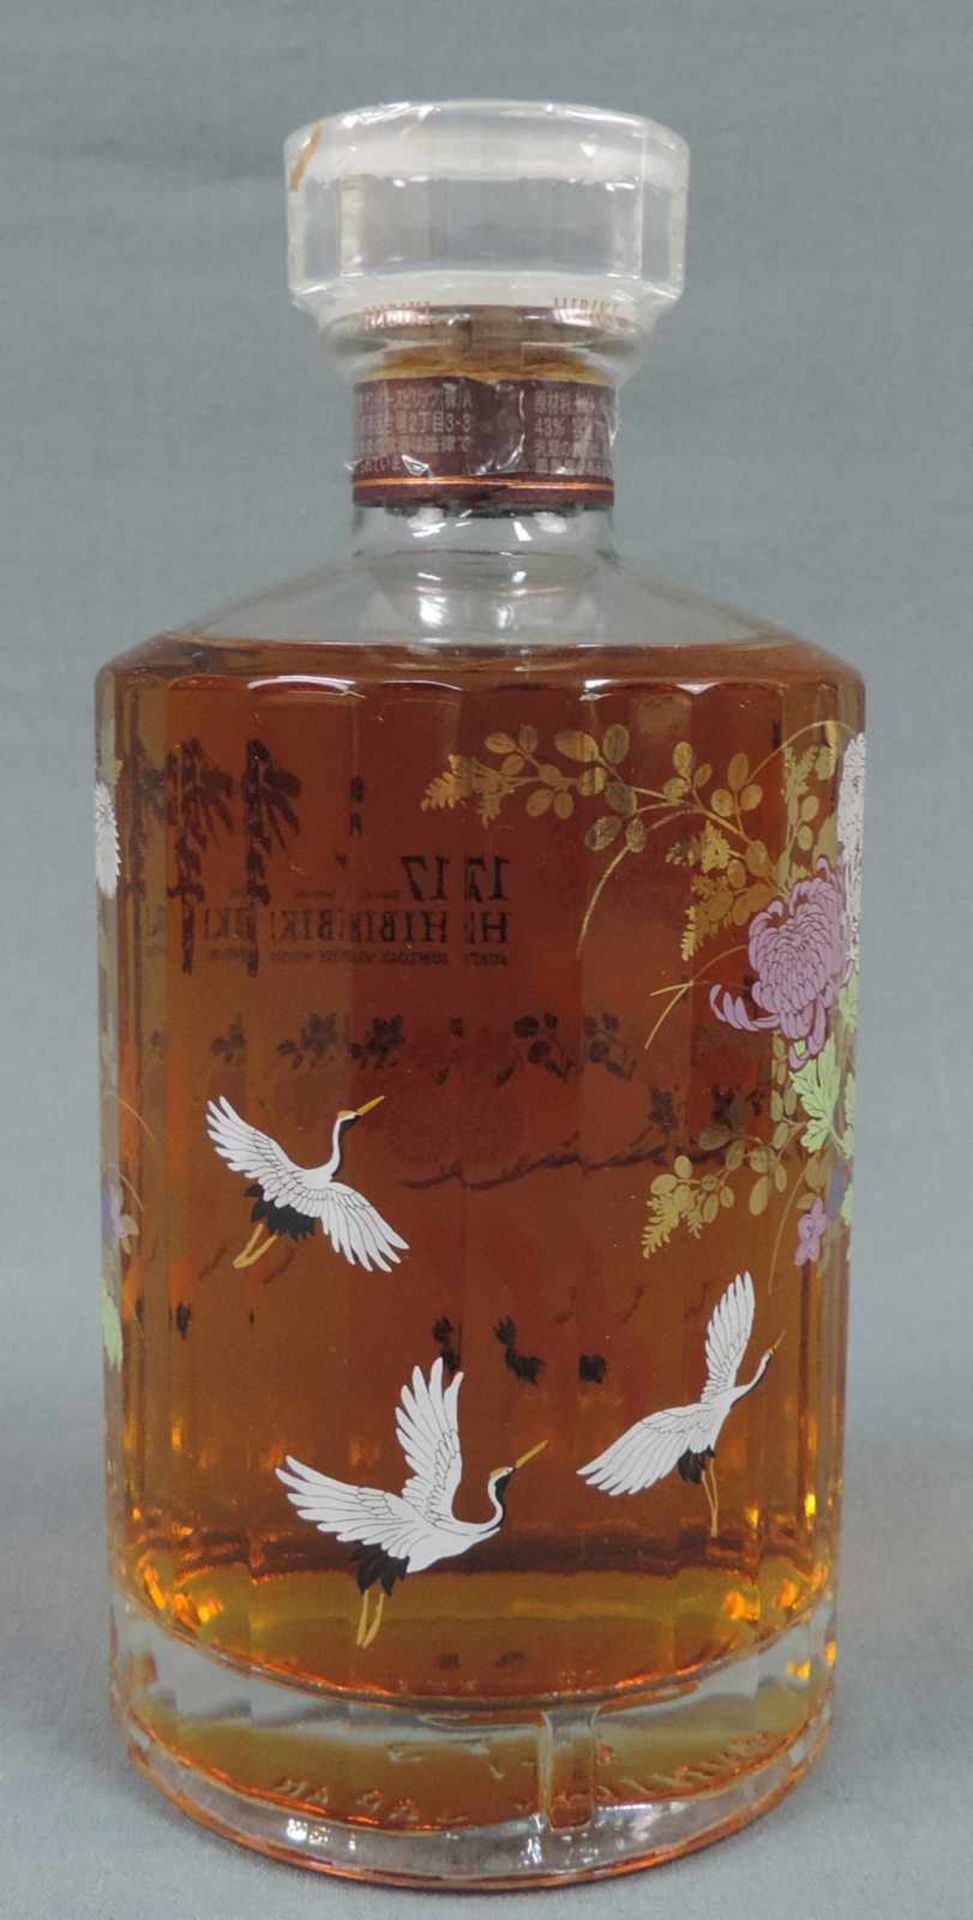 Hibiki Sutory Whiskey 17 years old. Kacho Fugetsu Special Limited Edition - one of 600. Original - Image 2 of 4